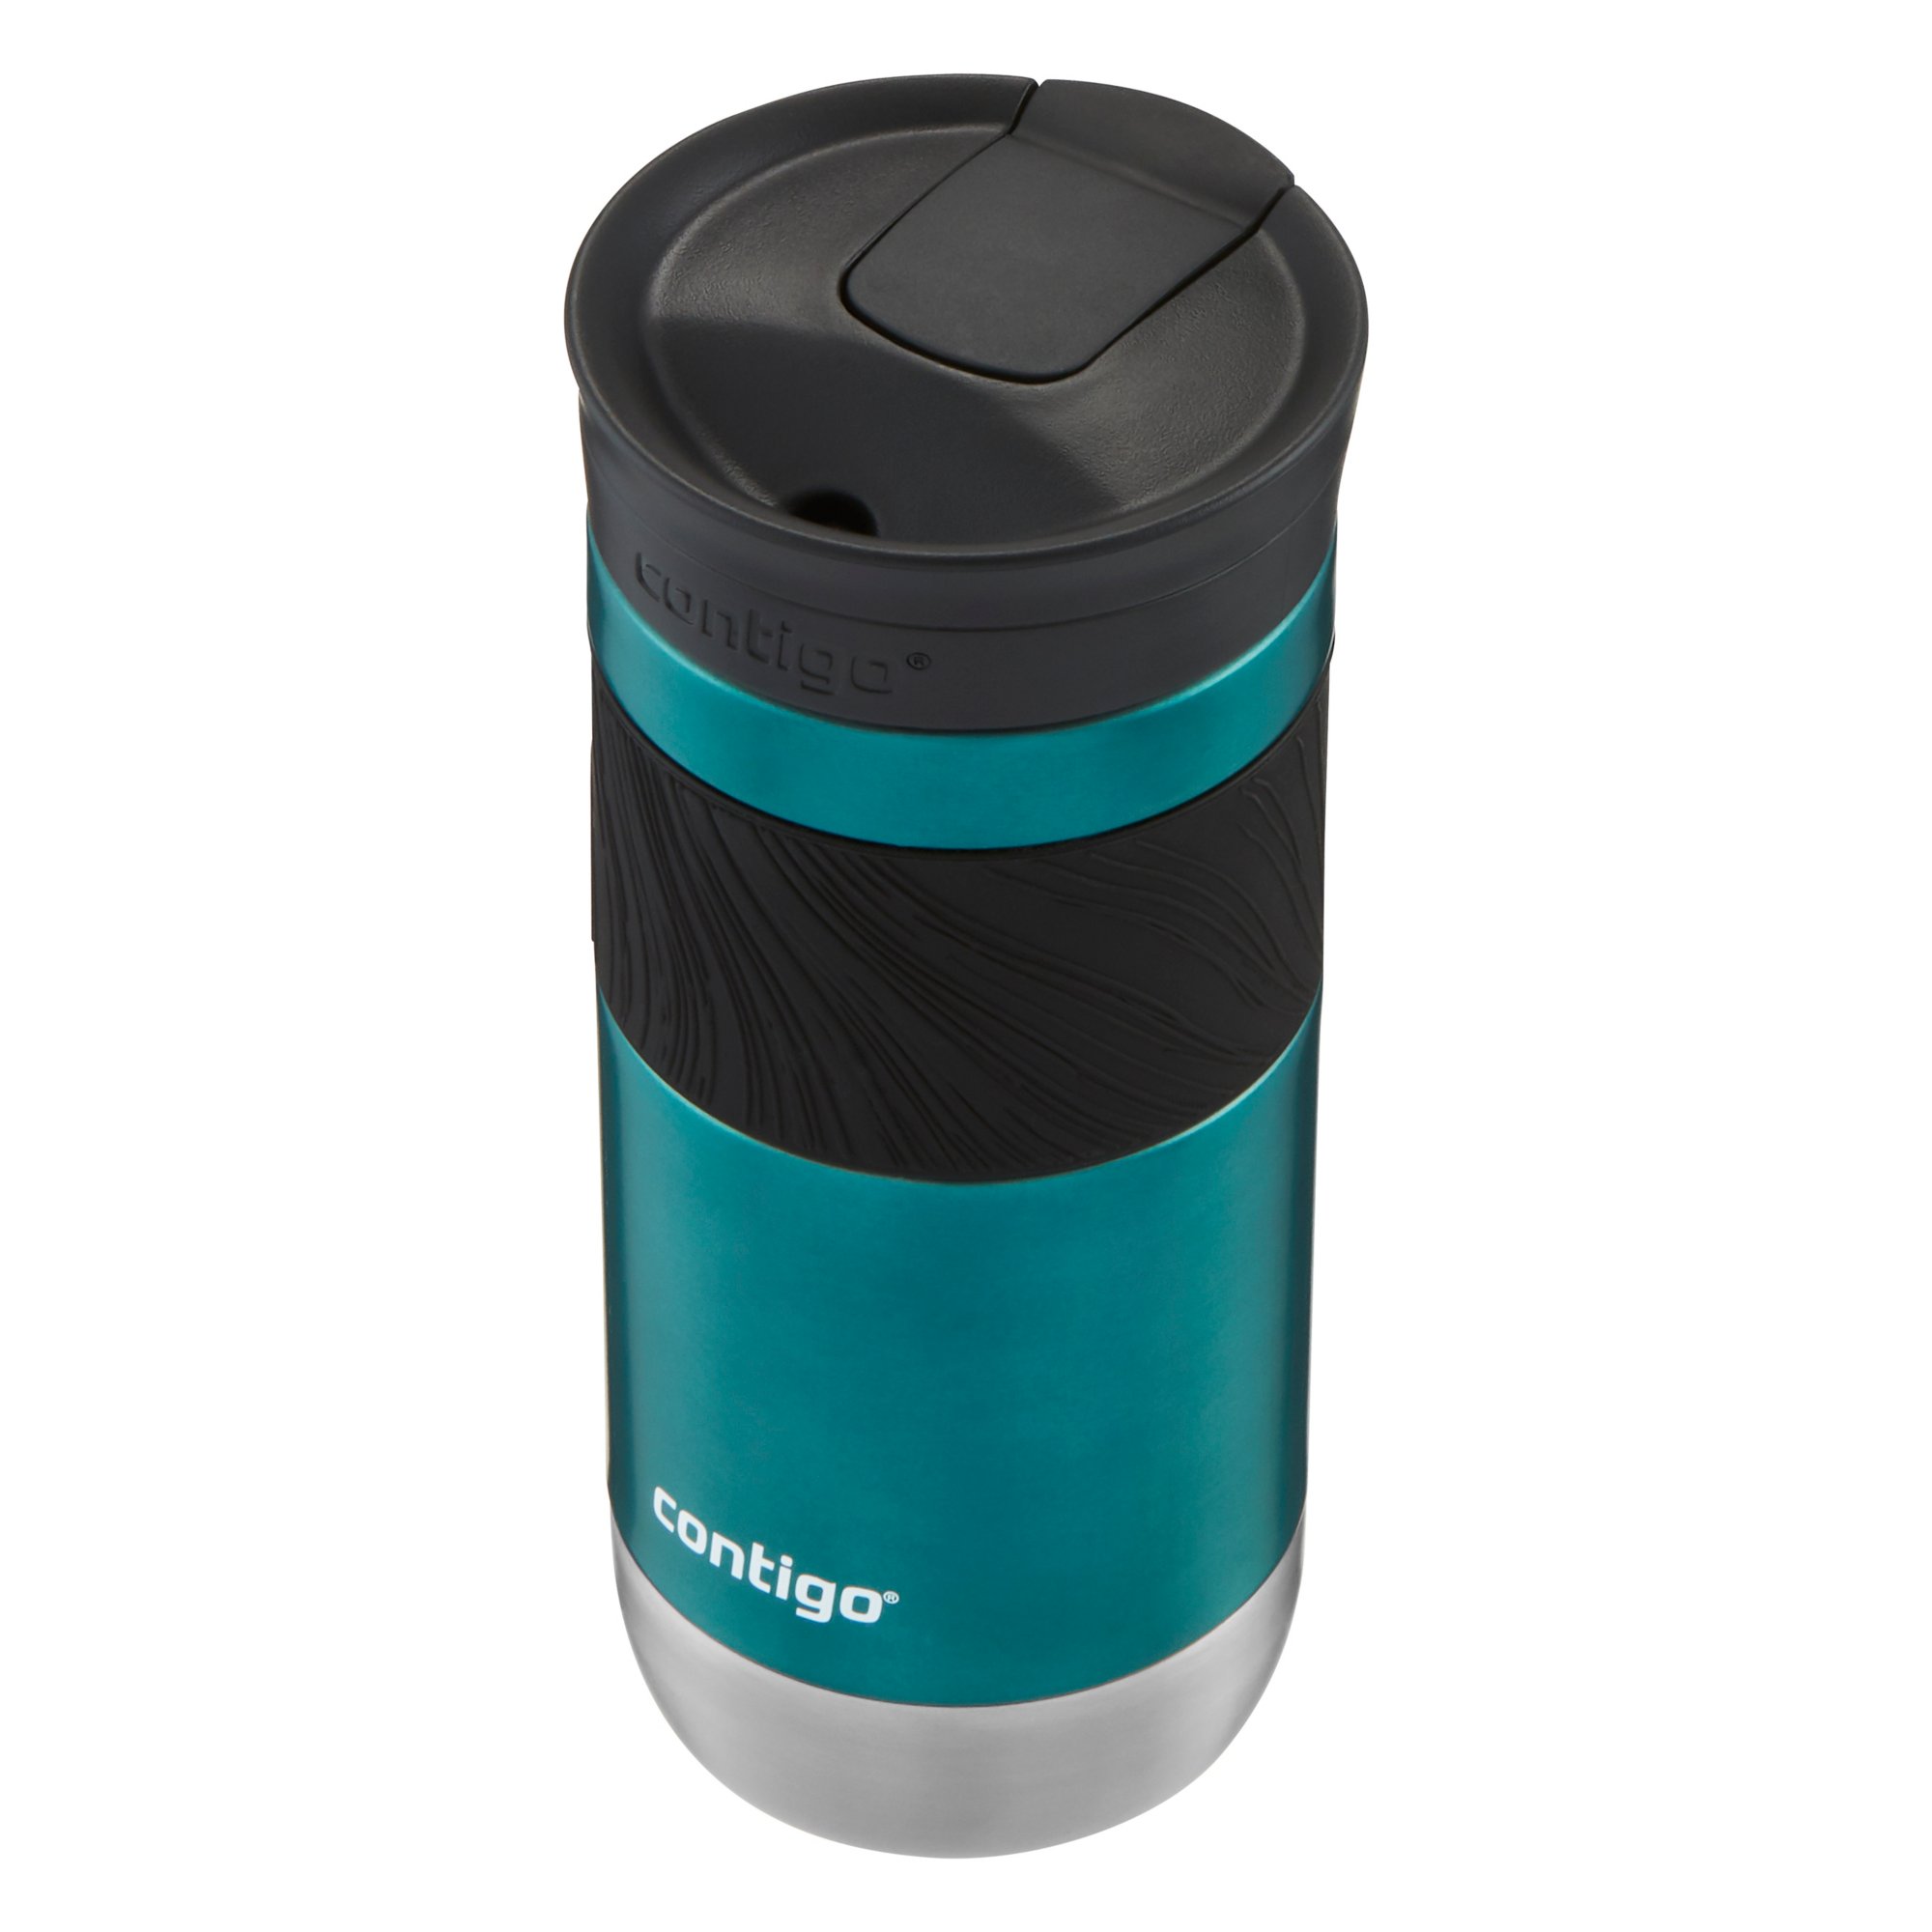 Contigo SnapSeal Byron Vacuum-Insulated Stainless Steel Travel Mug, 16 -  Buy Right Clicking